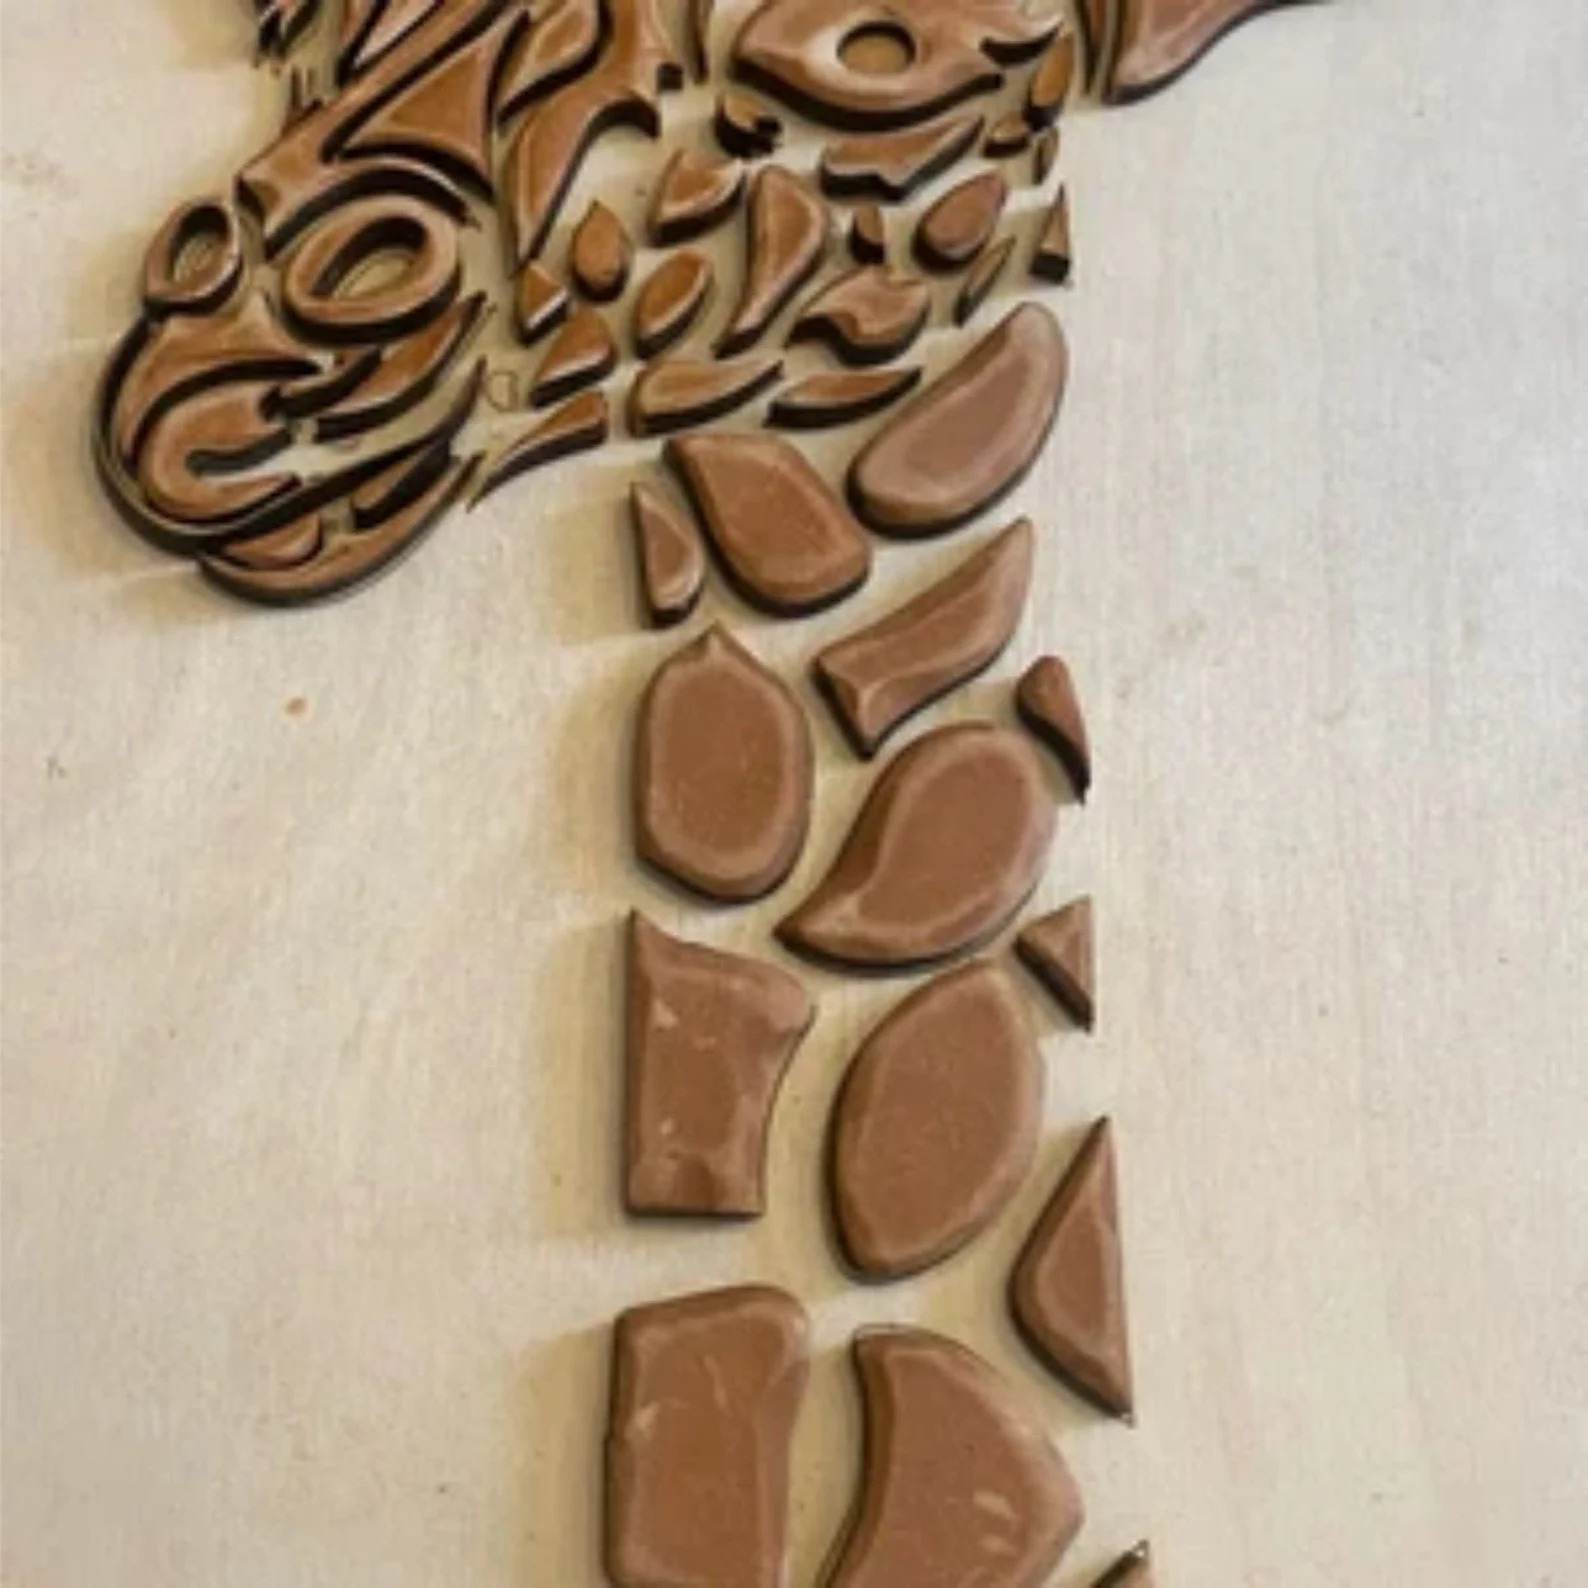 Giraffe made out of chocolate on a table.